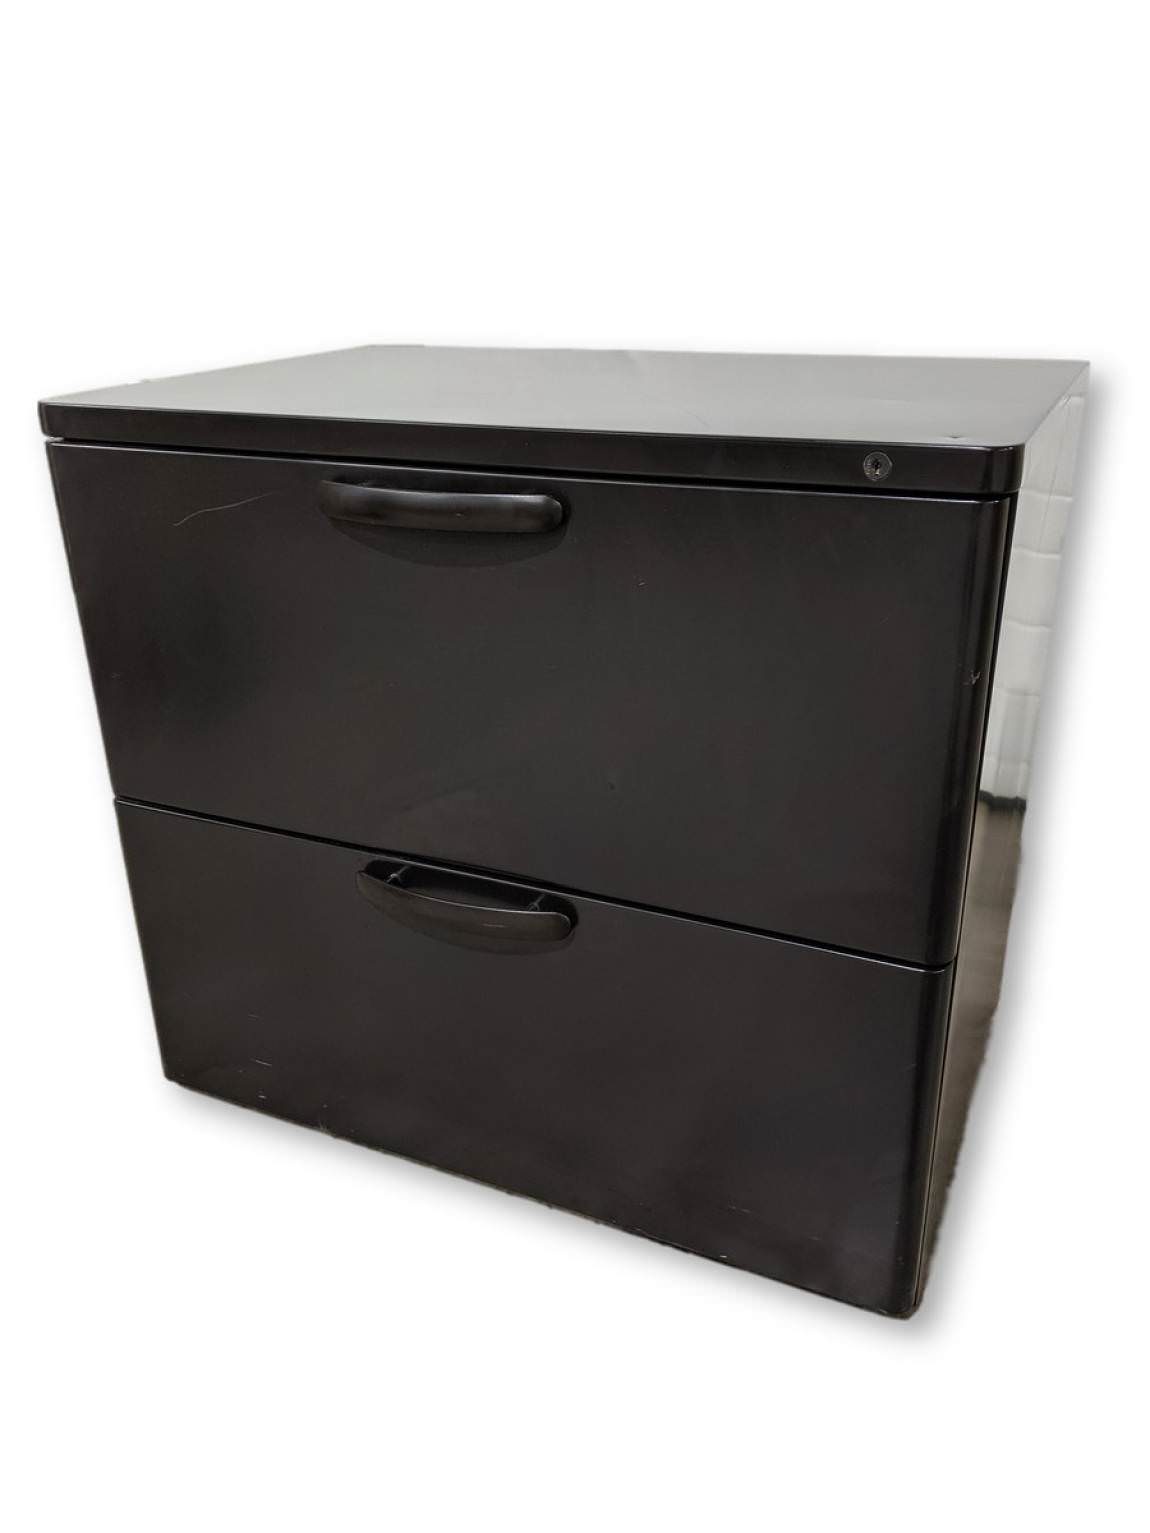 Black 2 Drawer Lateral Filing Cabinet – 29.5 Inch Wide